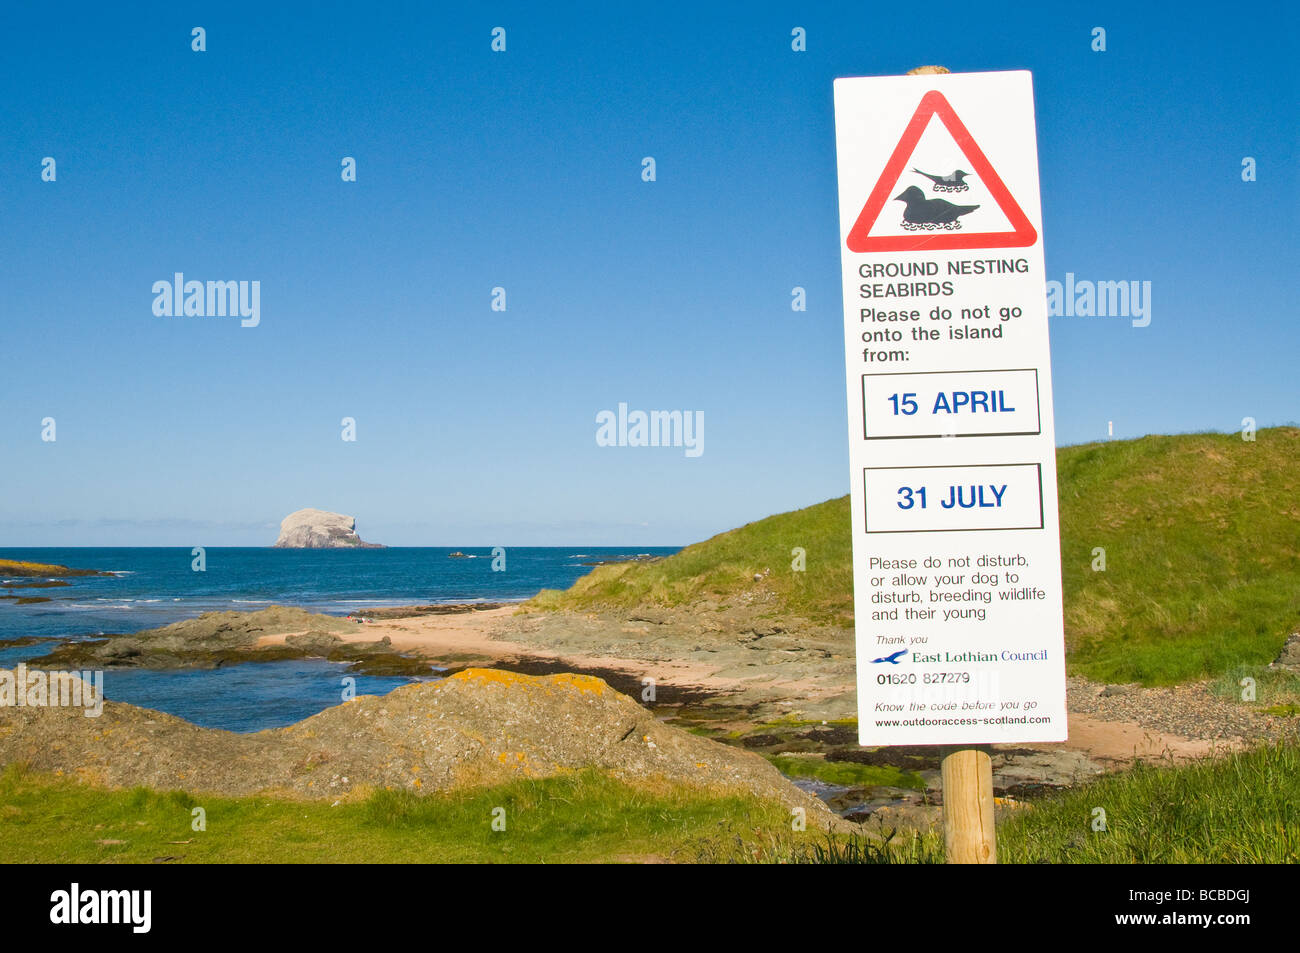 A sign warning of ground nesting birds, asking walkers to stay out of the area, at North Berwick, Scotland Stock Photo